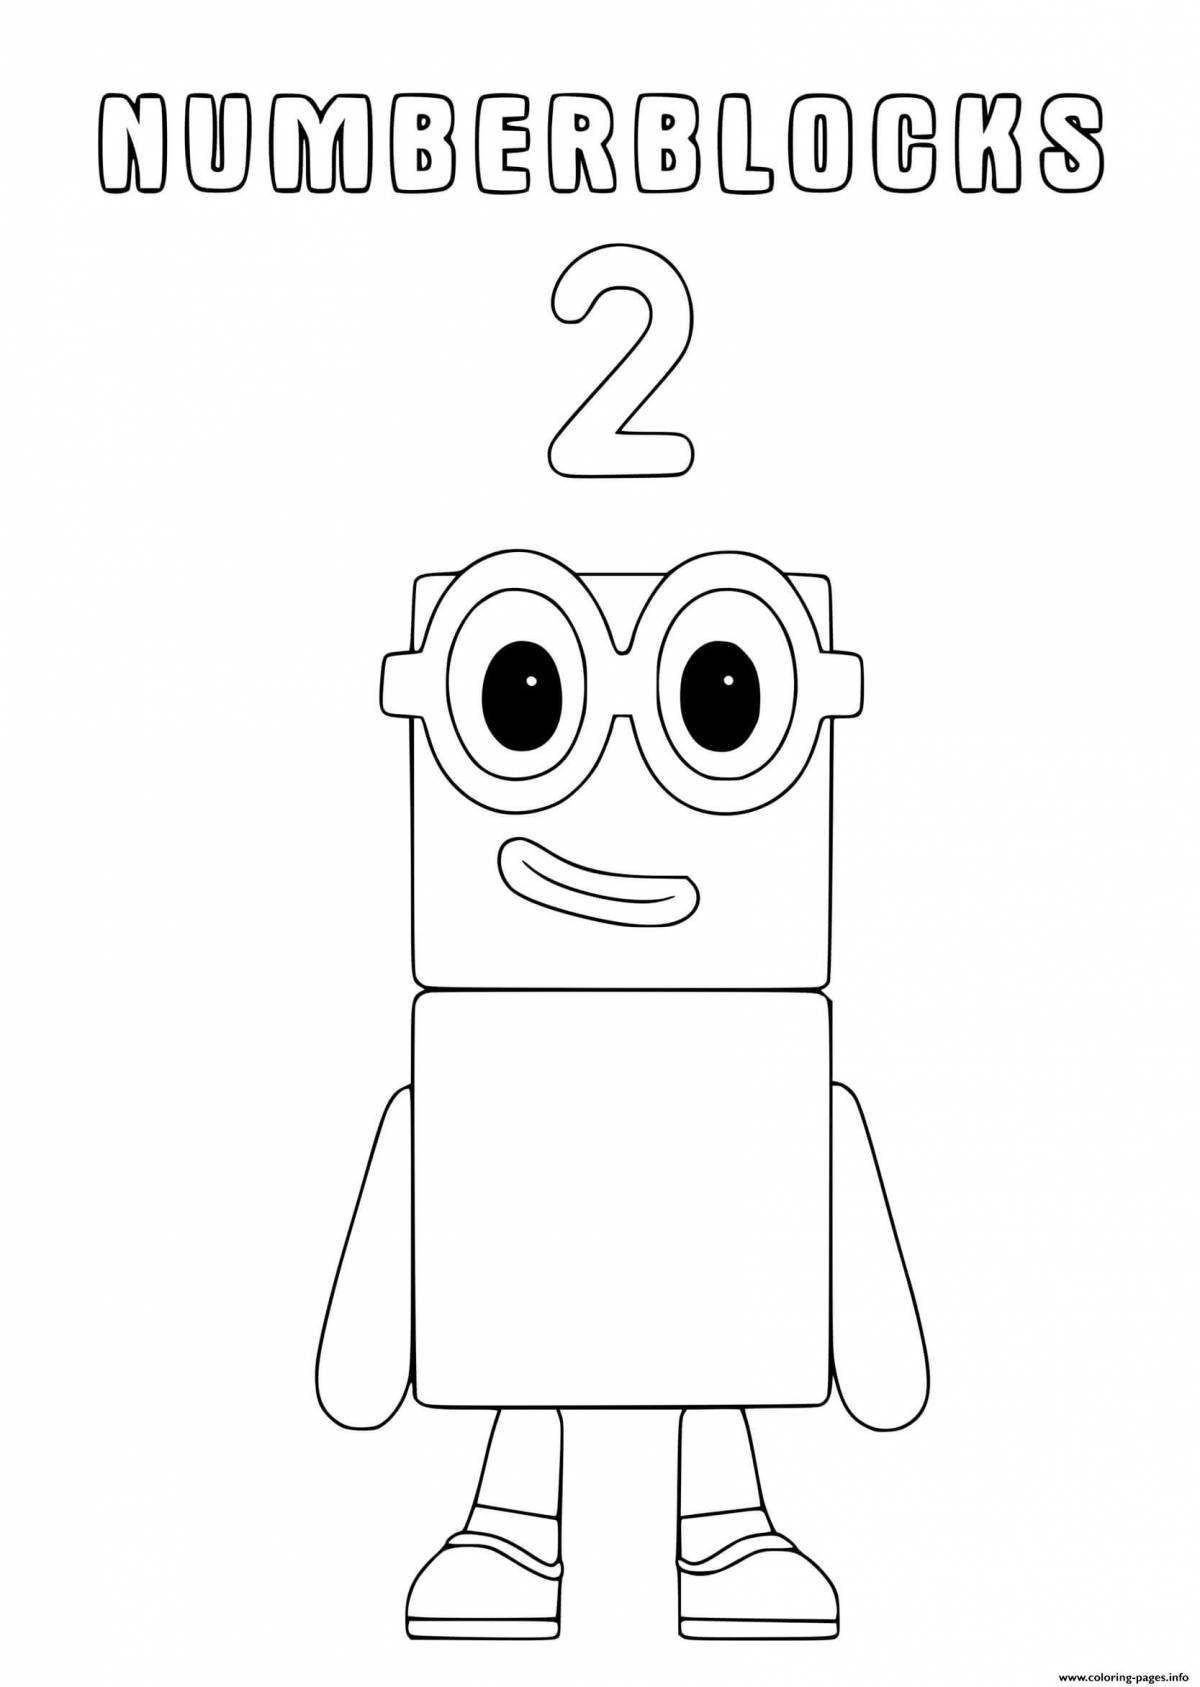 Coloring book with number blocks